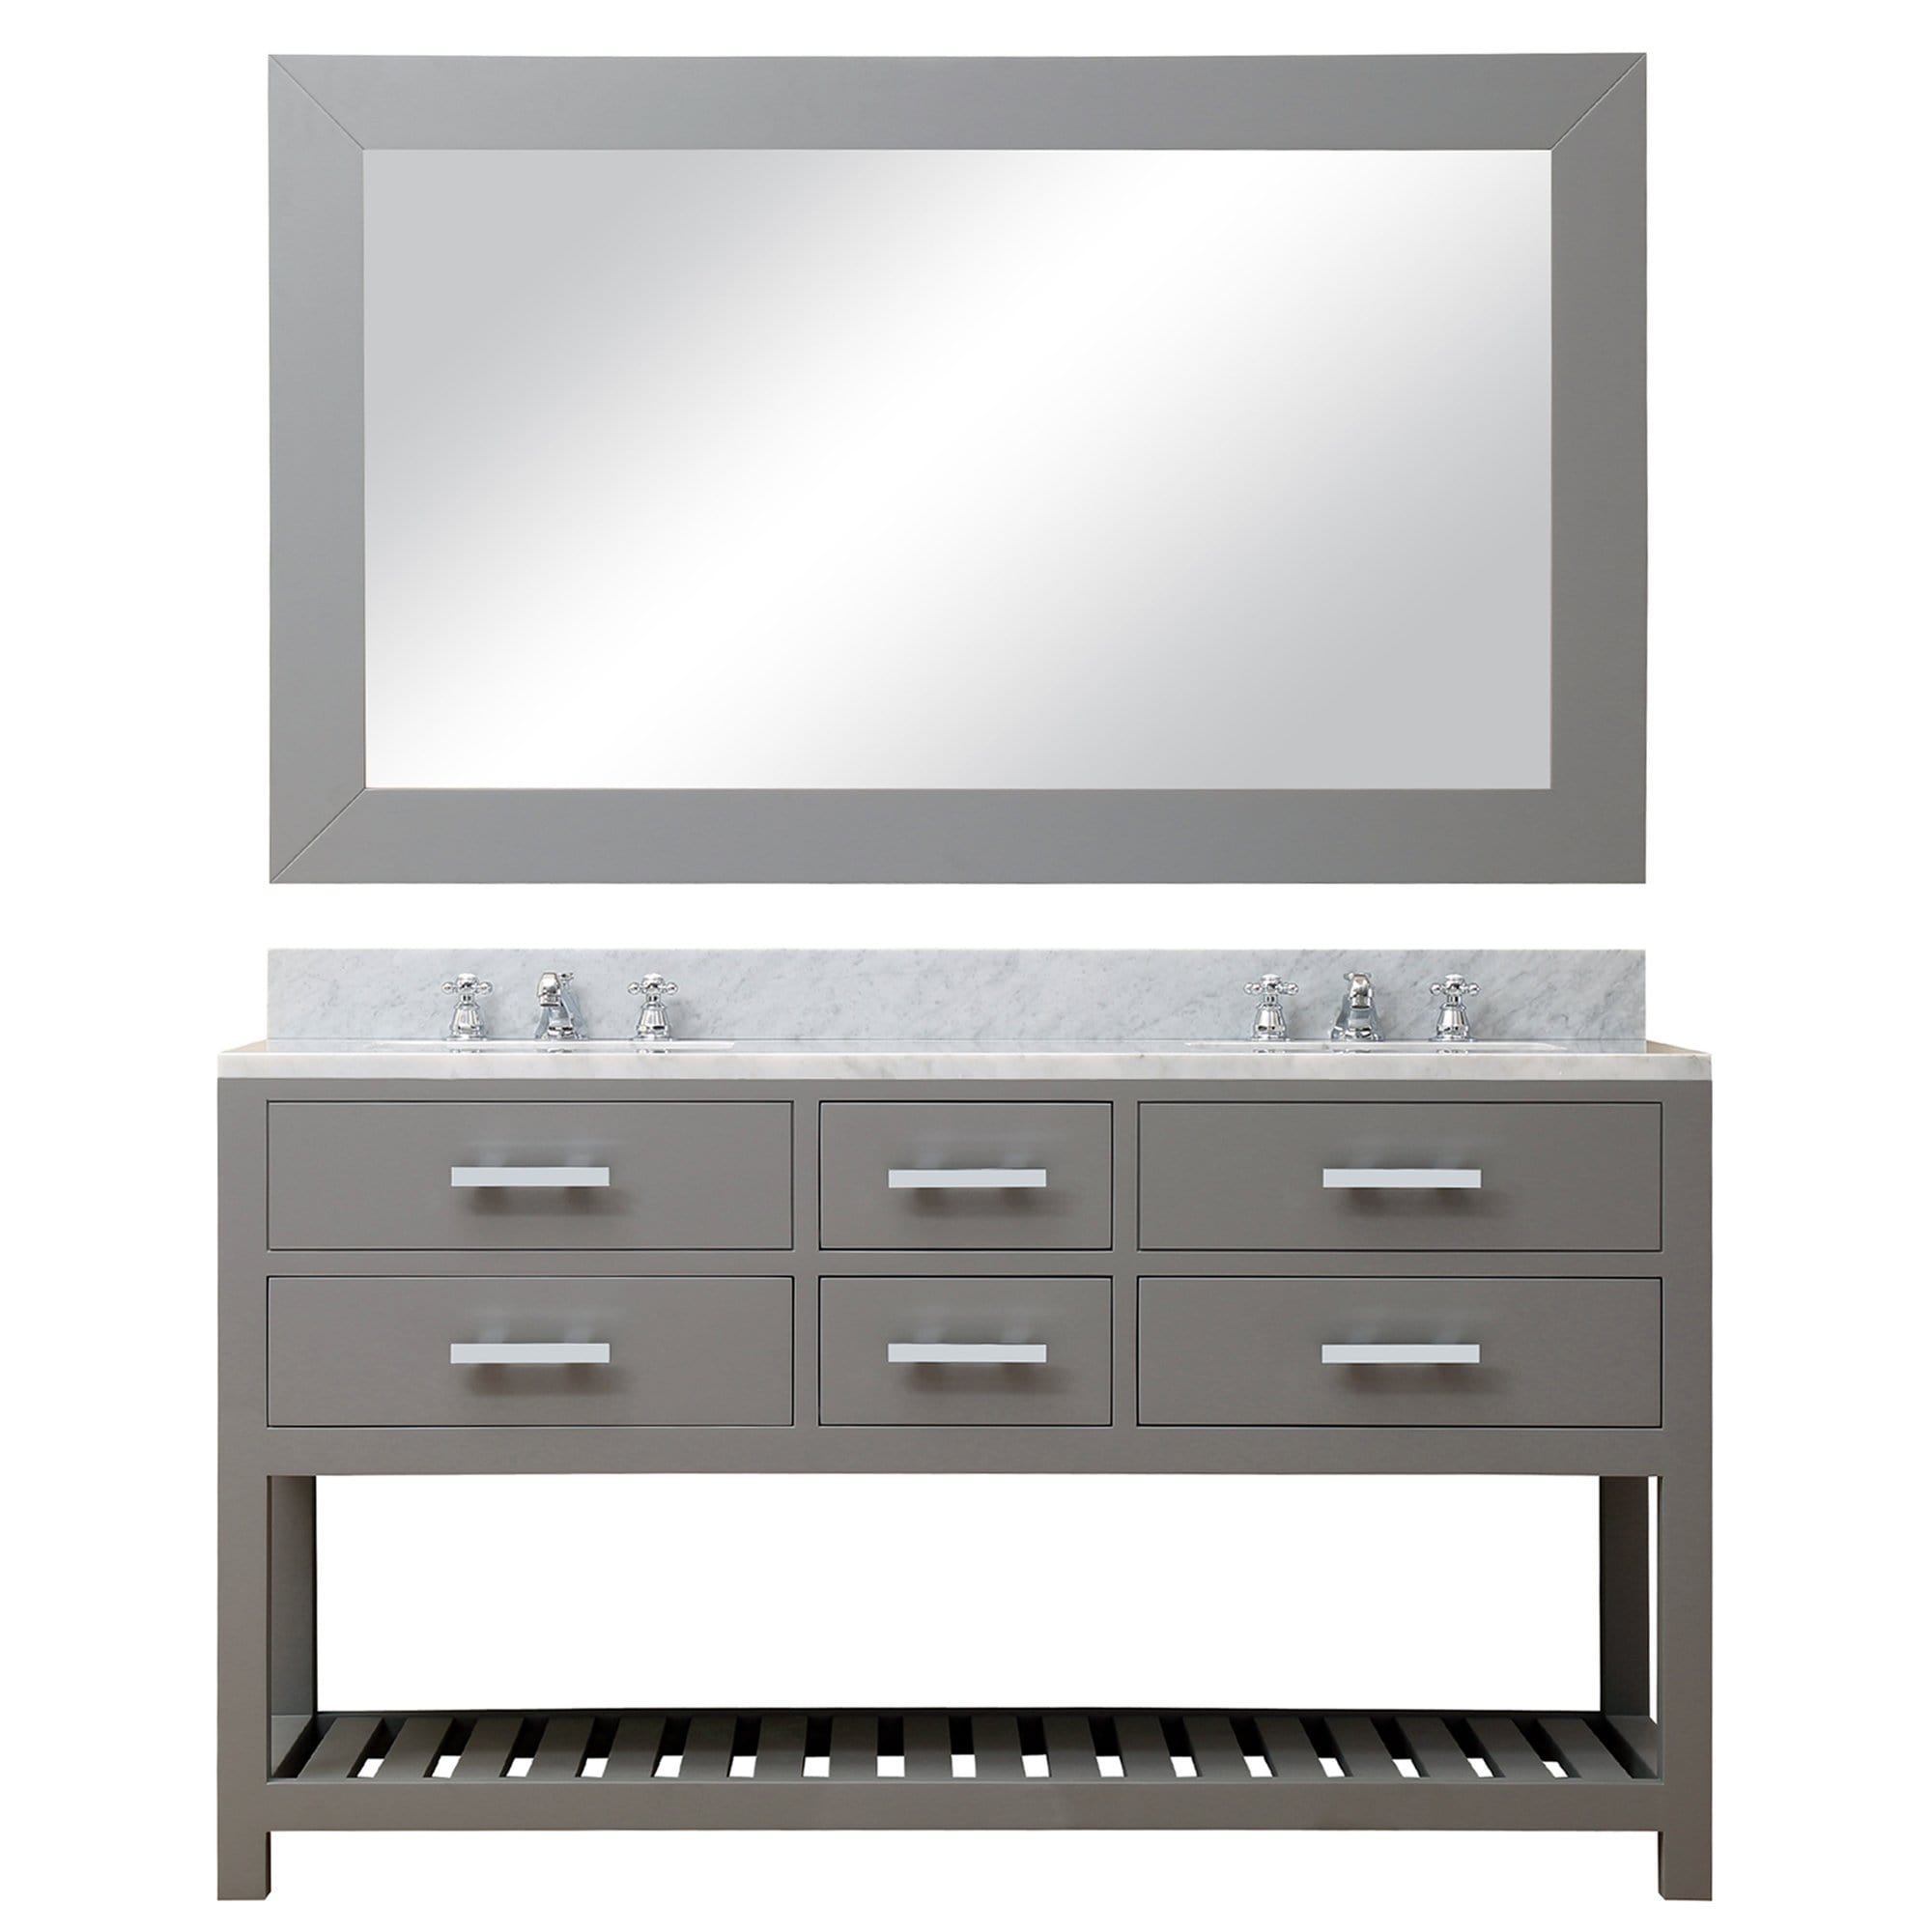 Water Creation 60 Inch Cashmere Grey Double Sink Bathroom Vanity With Matching Framed Mirror From The Madalyn Collection - Molaix700621683247Bathroom vanityMA60CW01CG-R60000000